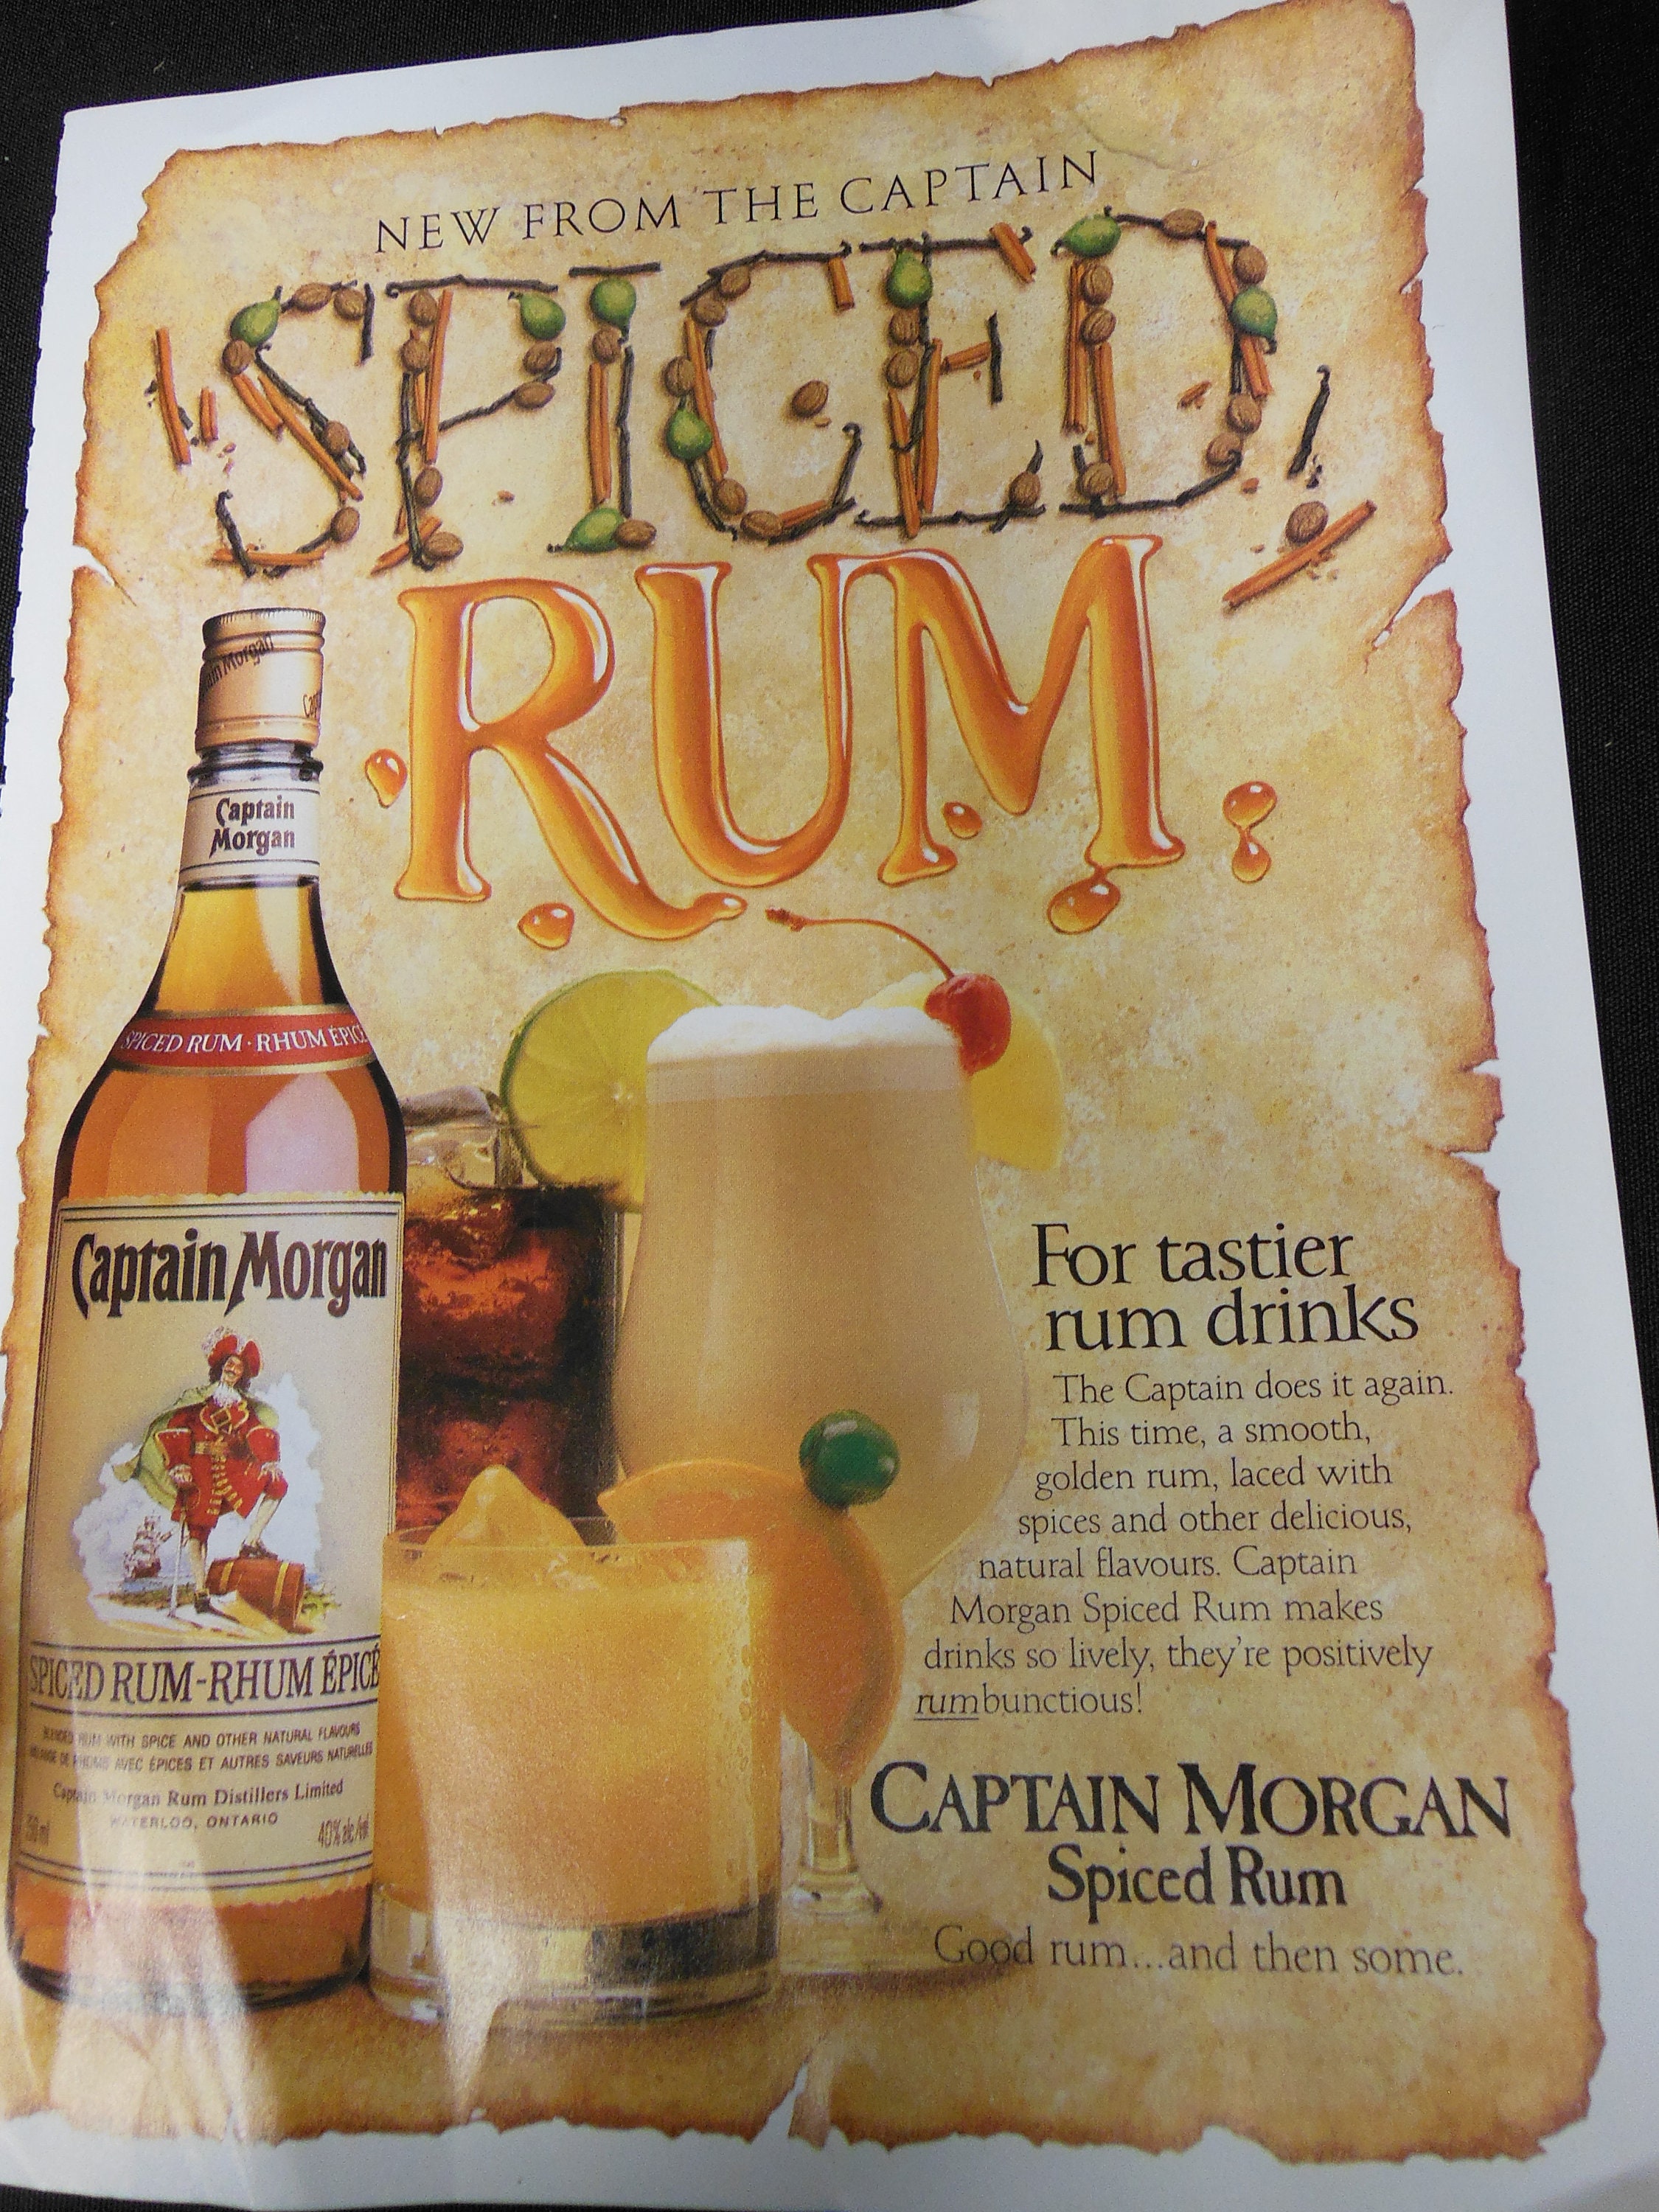 Vintage 1980s De Luxe Rum Captain Morgan Rhum in gold & dark 8 by 11 ready for framing inexpensive shipping, magazine ad